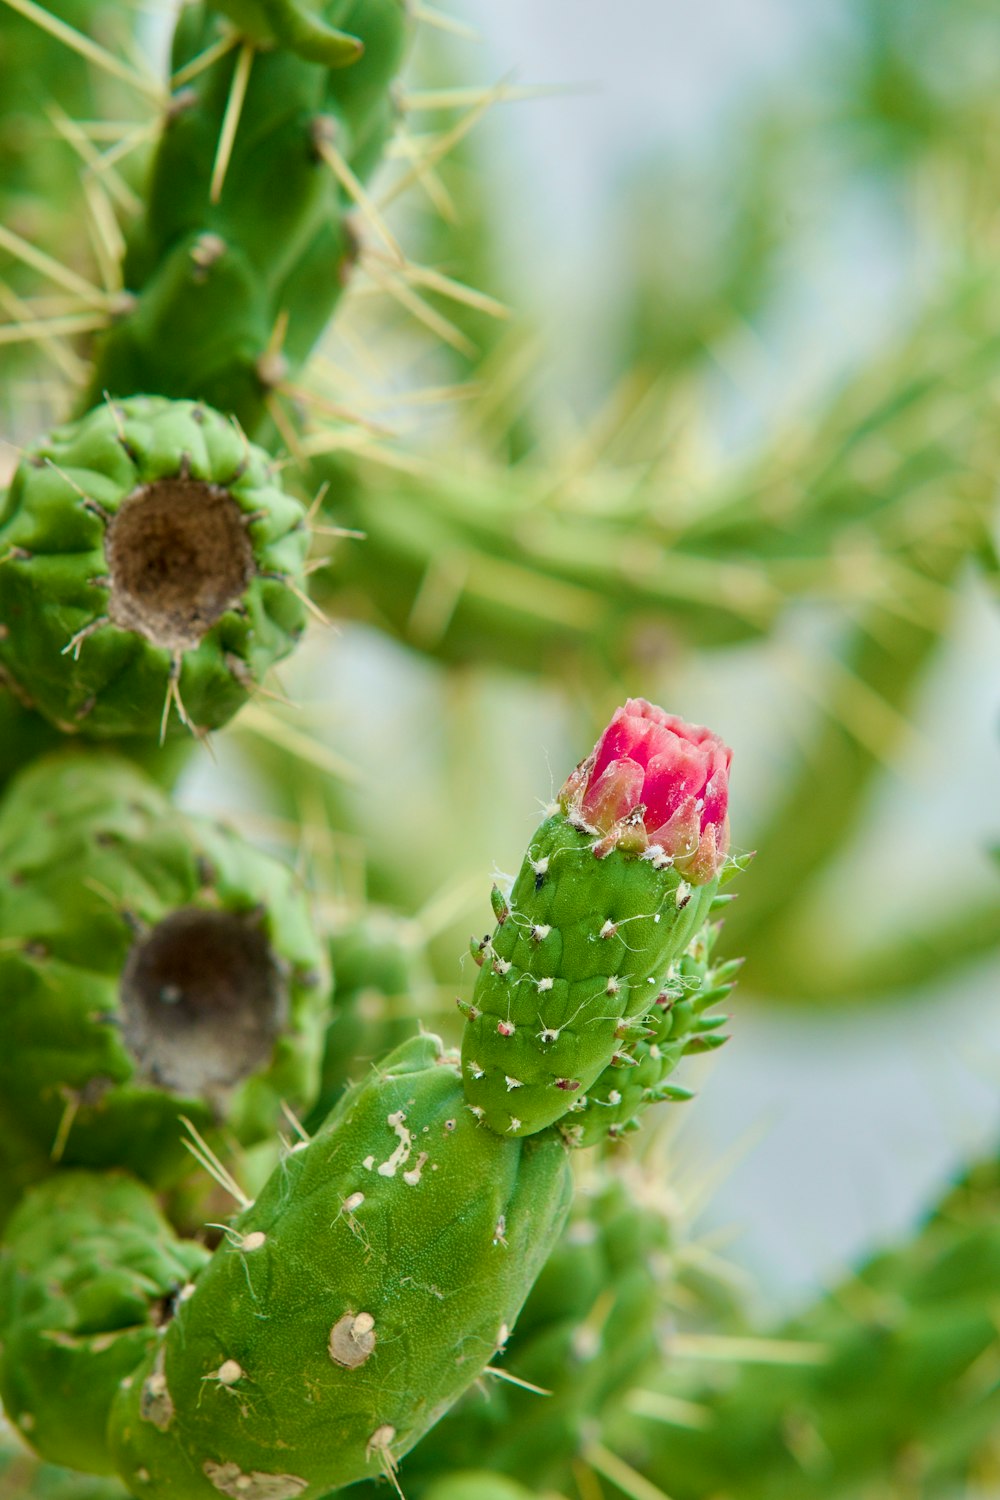 a close up of a green cactus with a pink flower